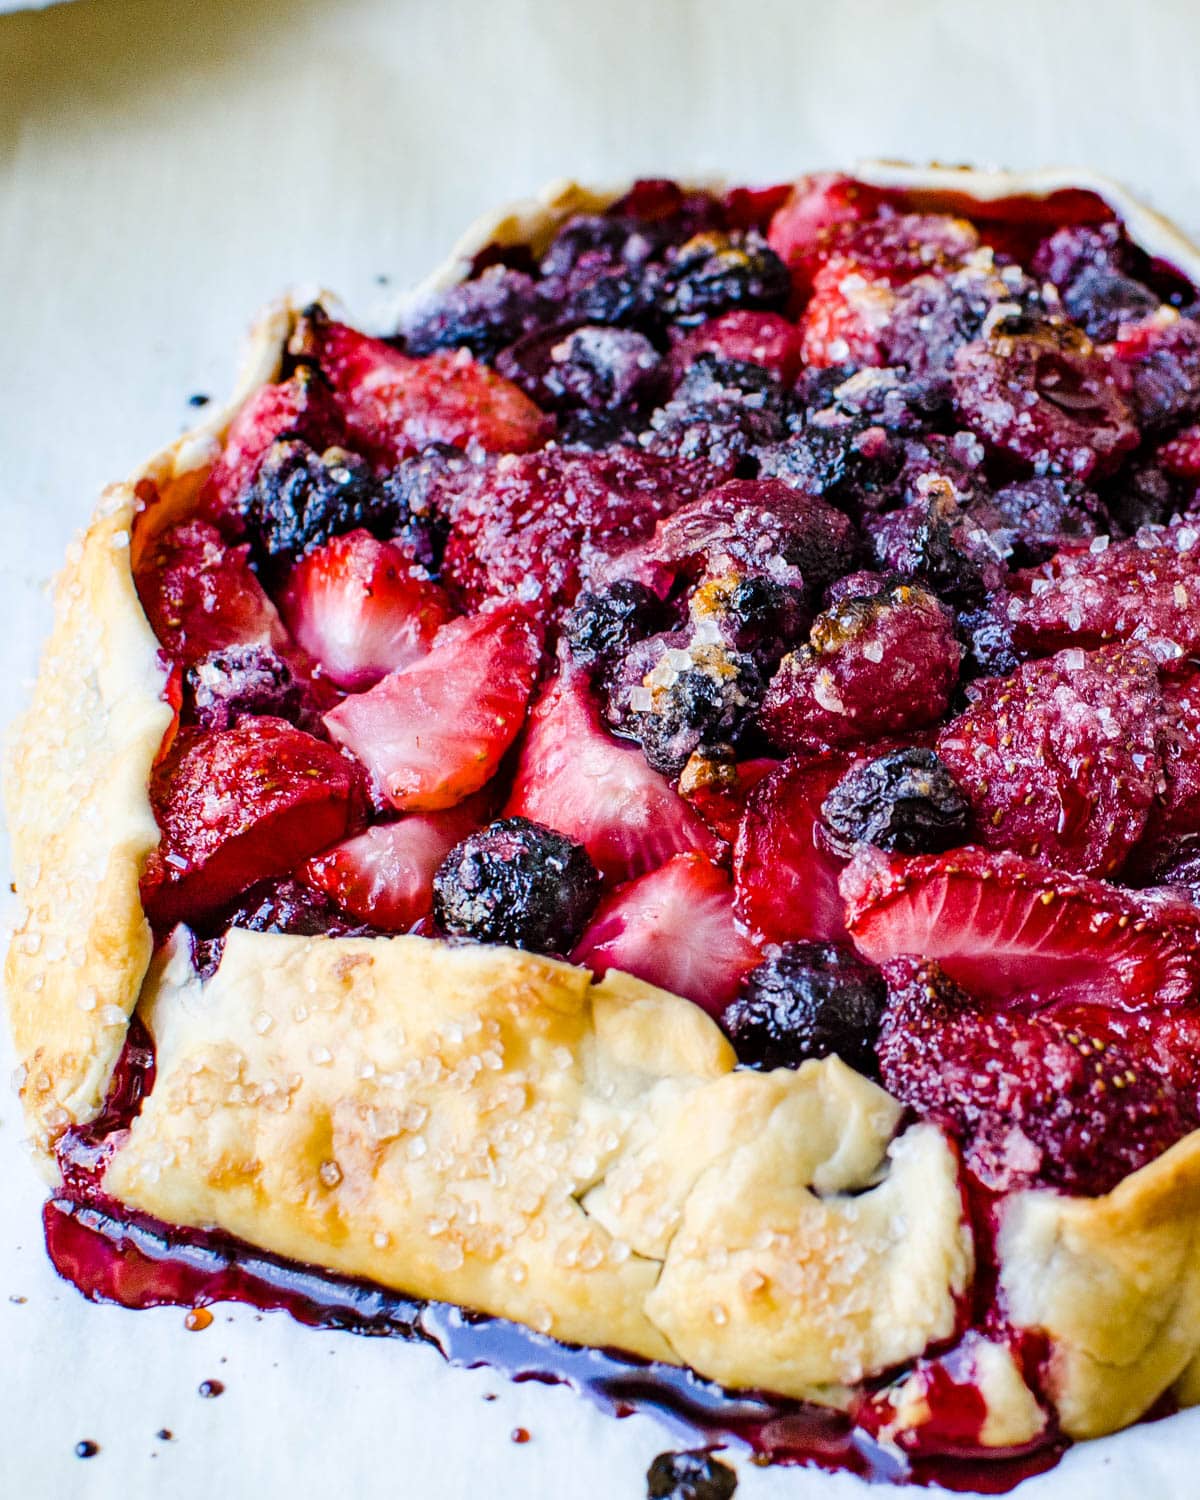 A mixed berry free form tart baked until golden.